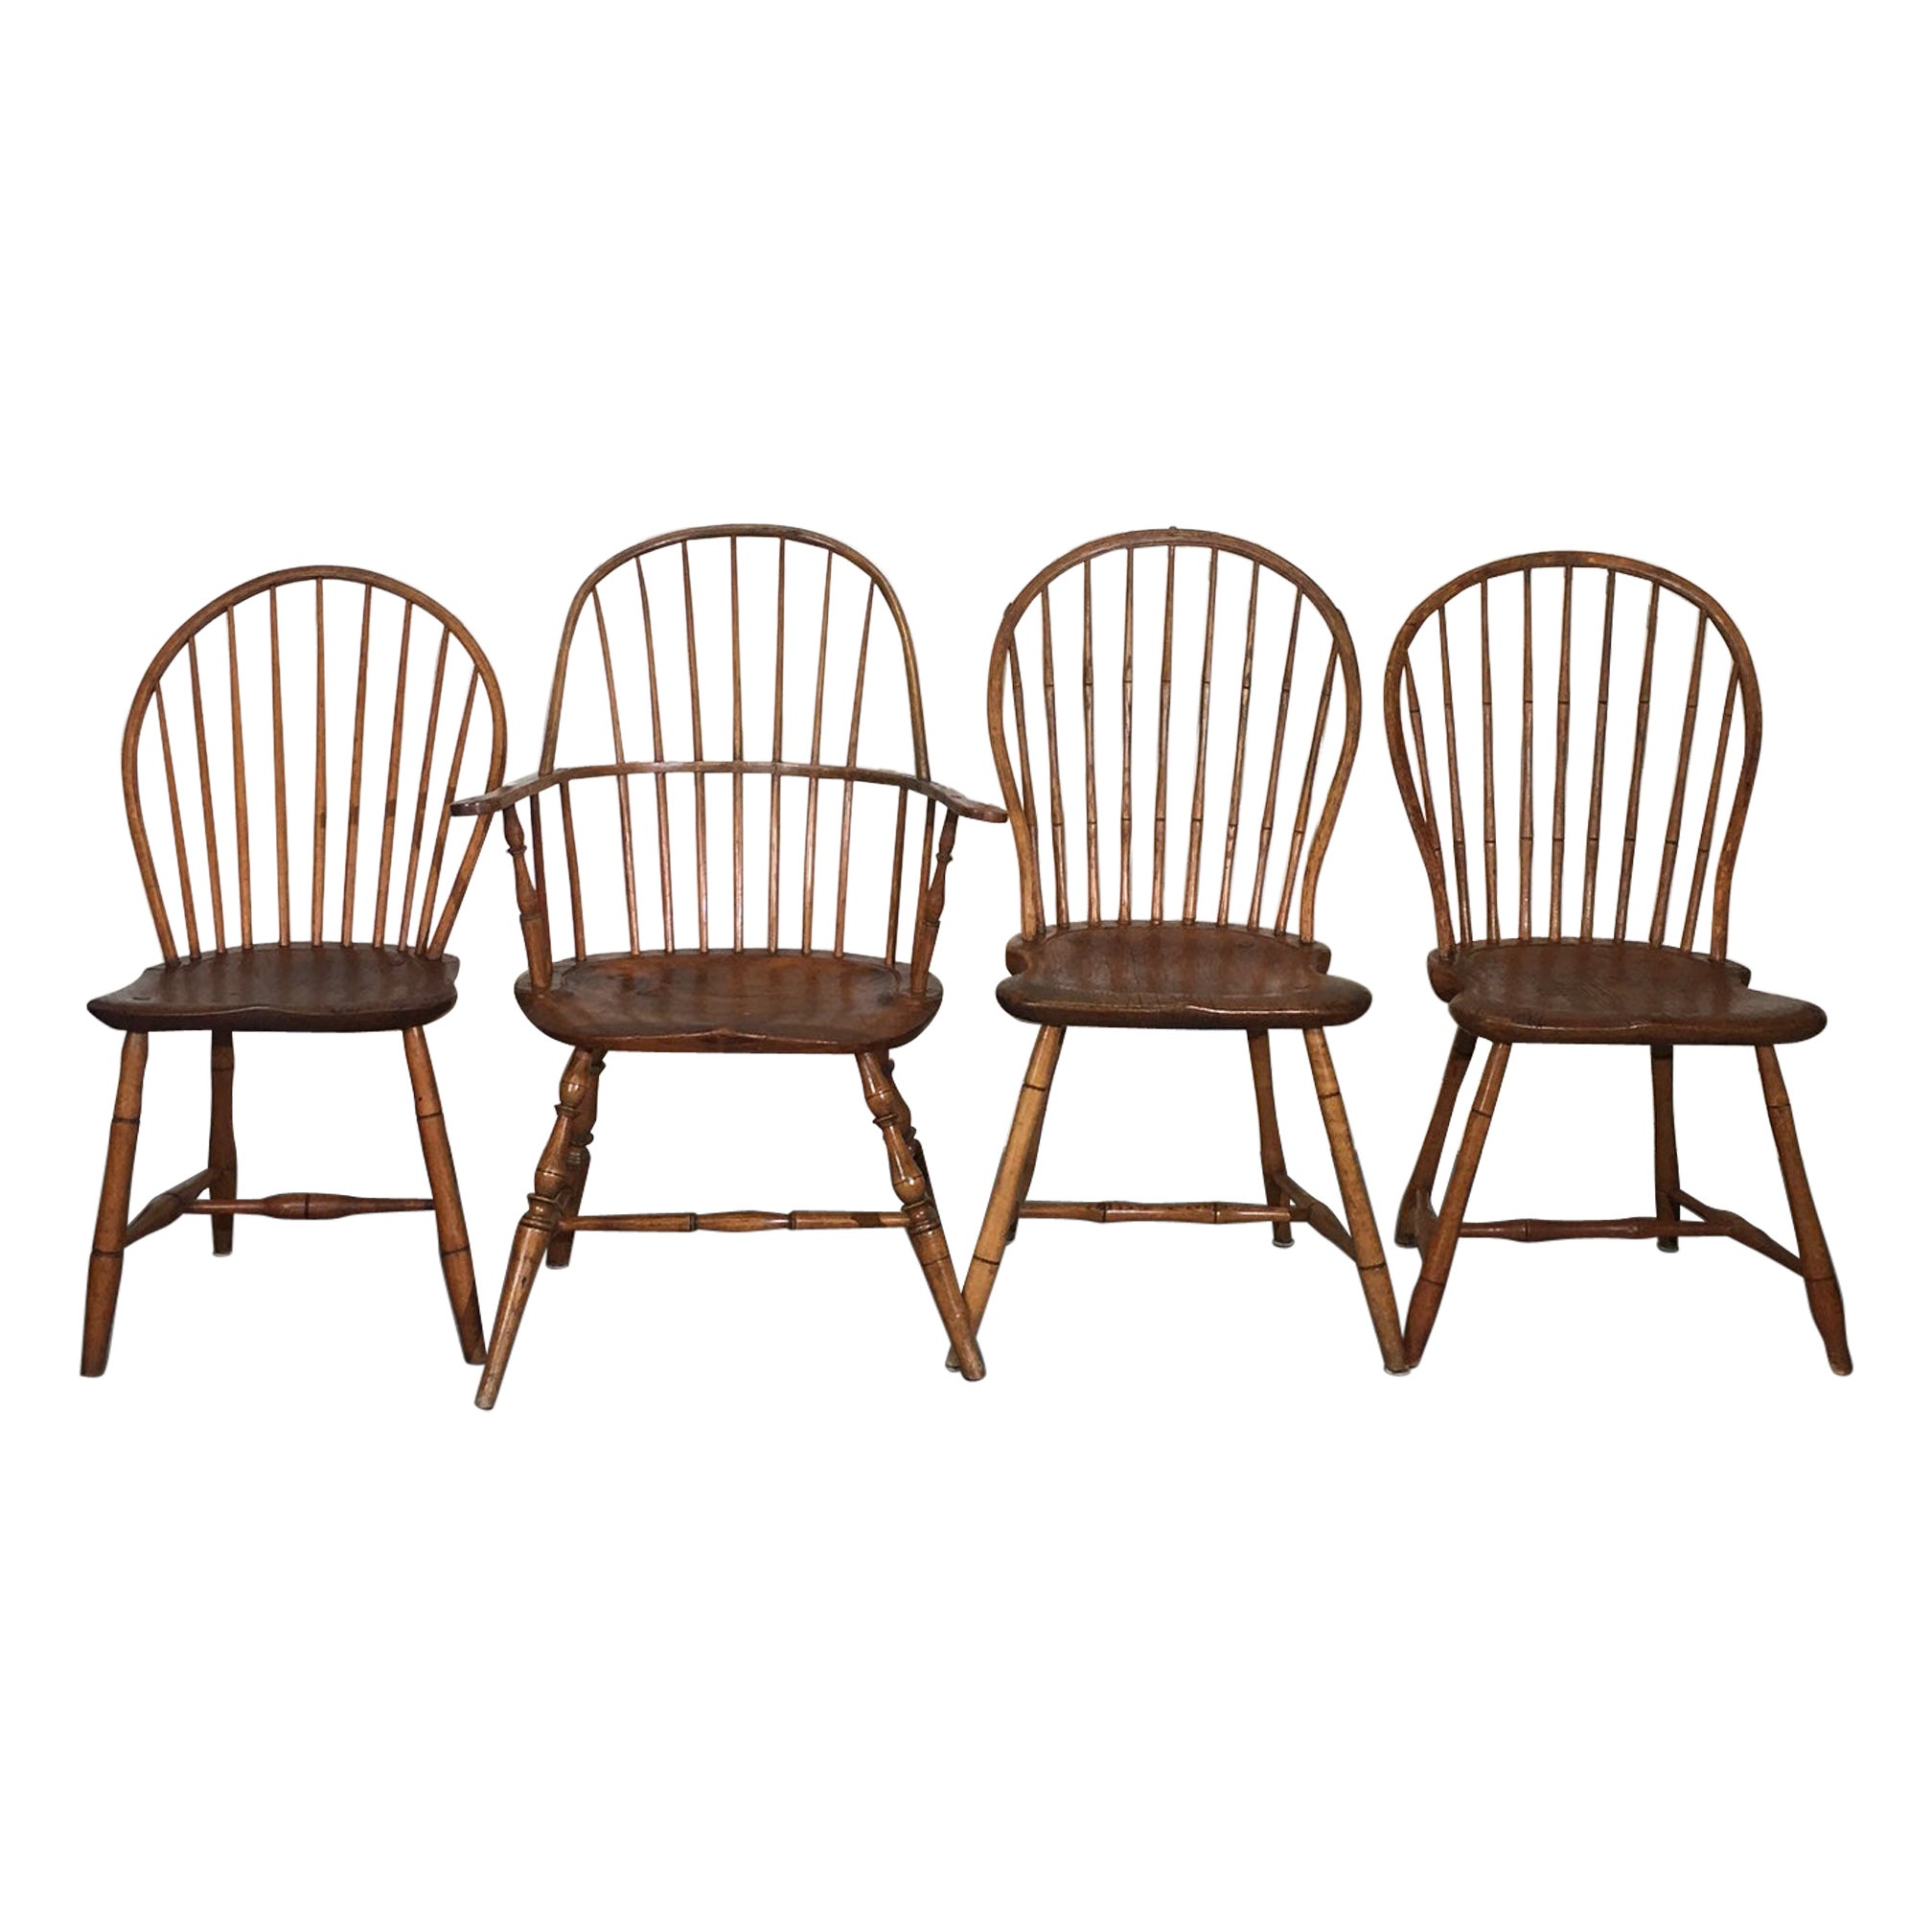 Rustic Chairs Set of 4 For Sale